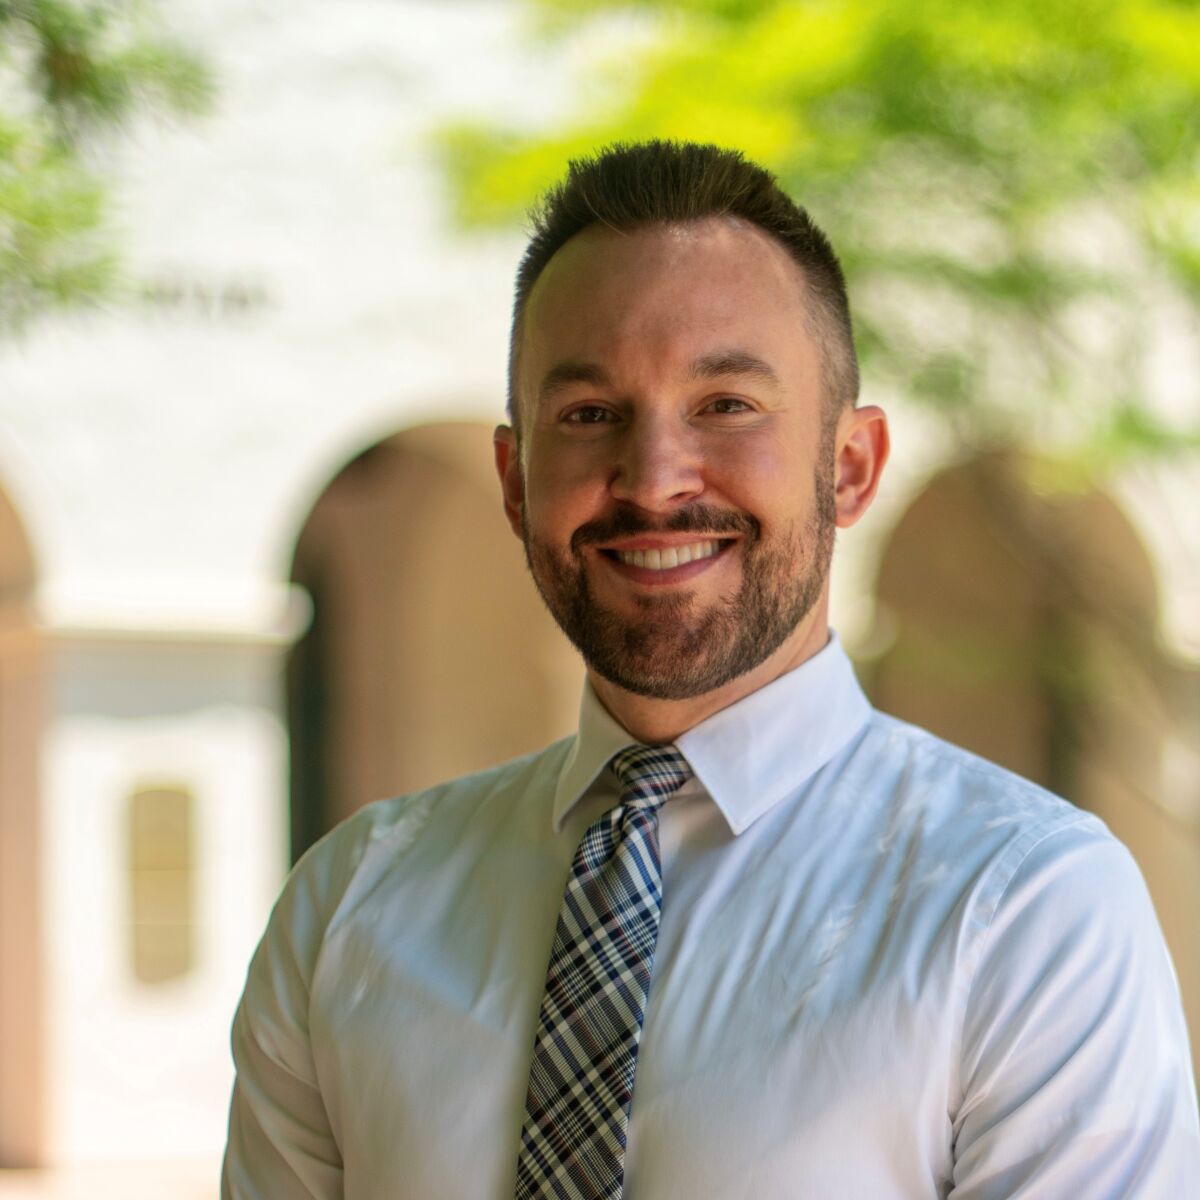 Vincent Pompei, an assistant professor in the doctoral program for educational leadership at San Diego State University